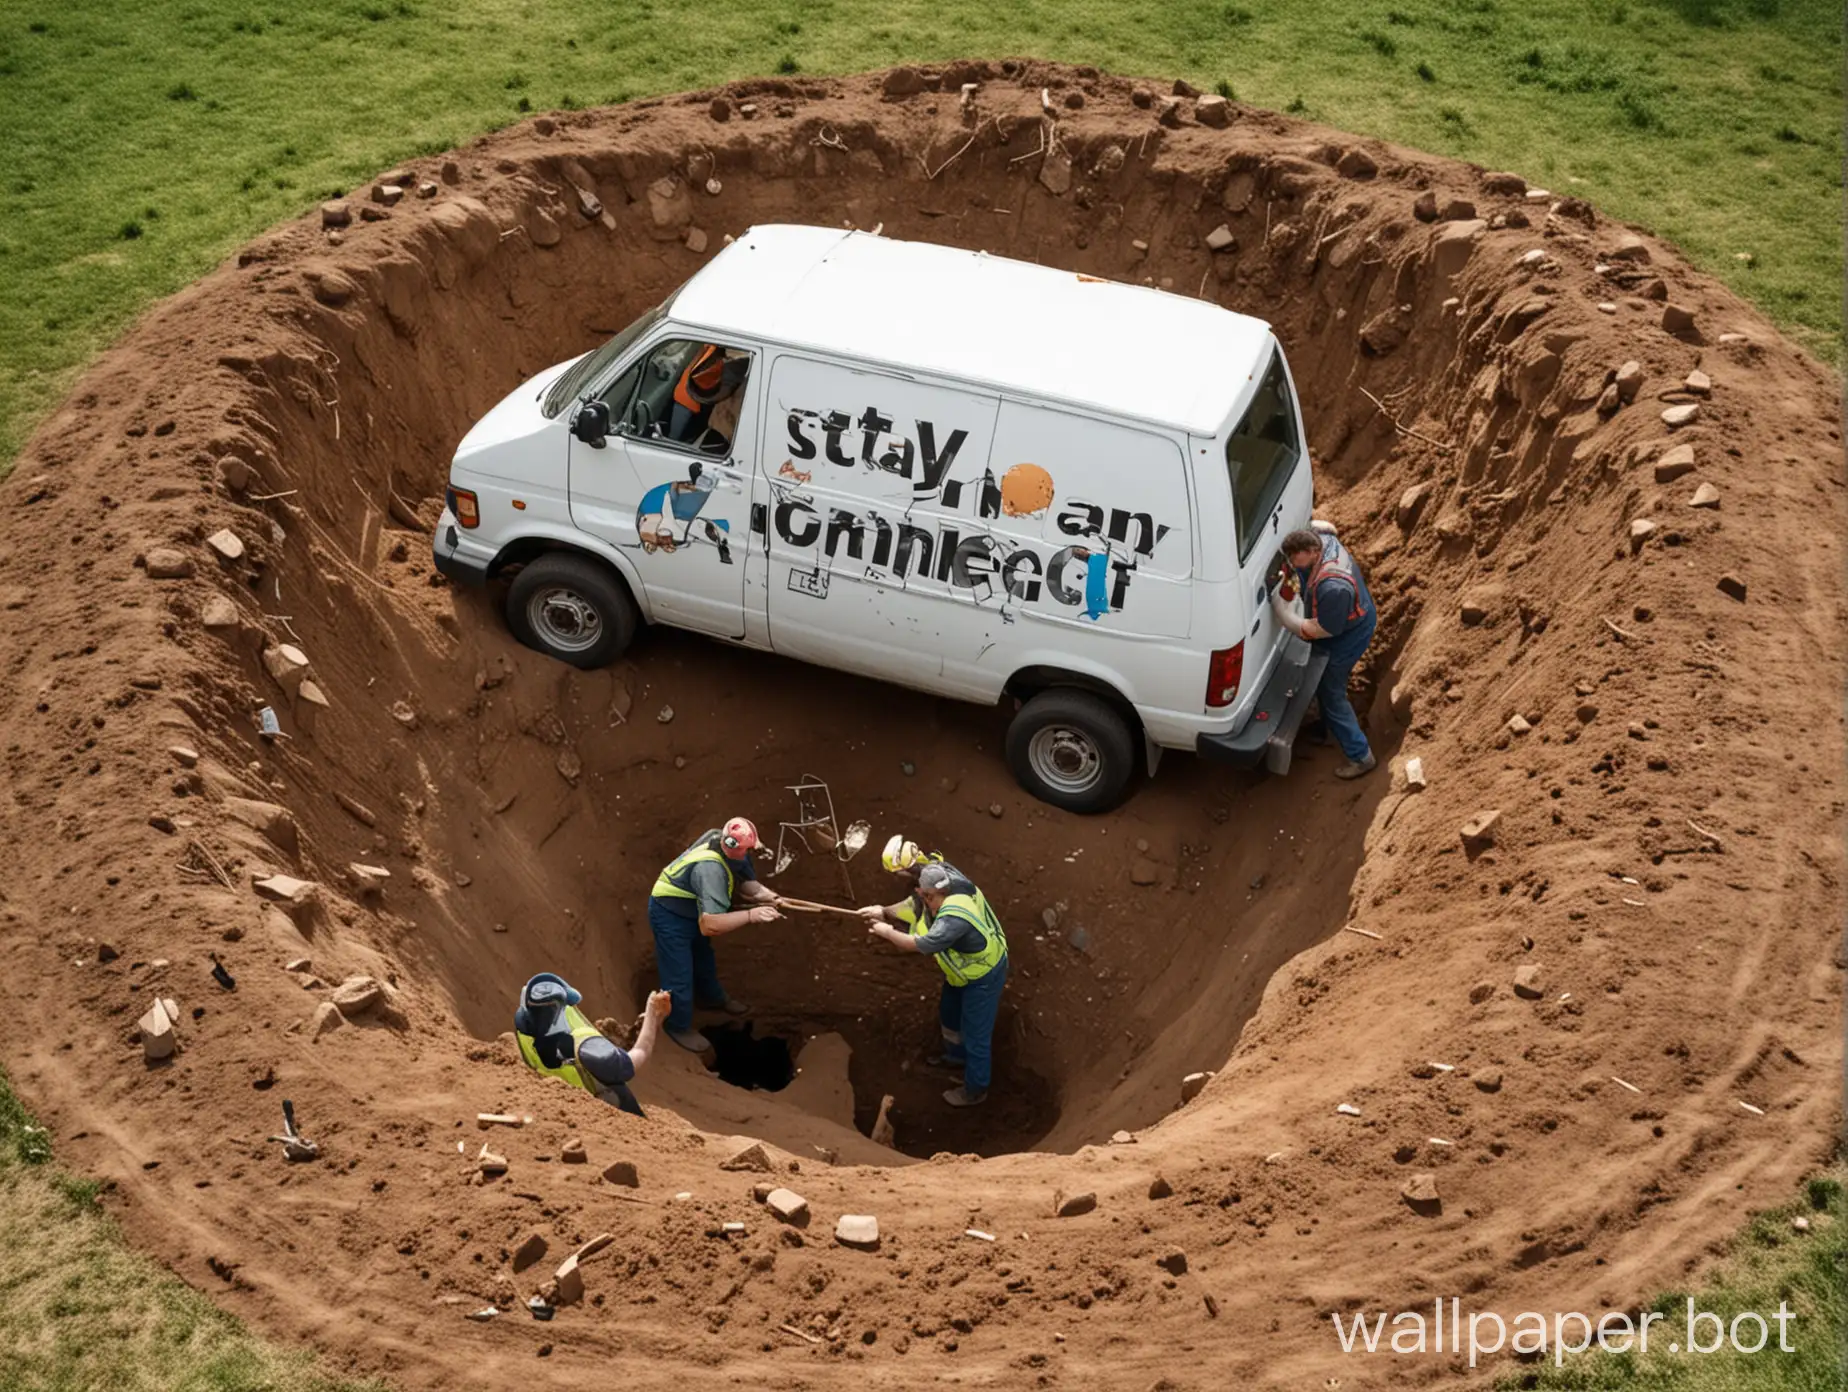 a van with the text "stay connected" on it, two fat men are digging a hole in the ground.